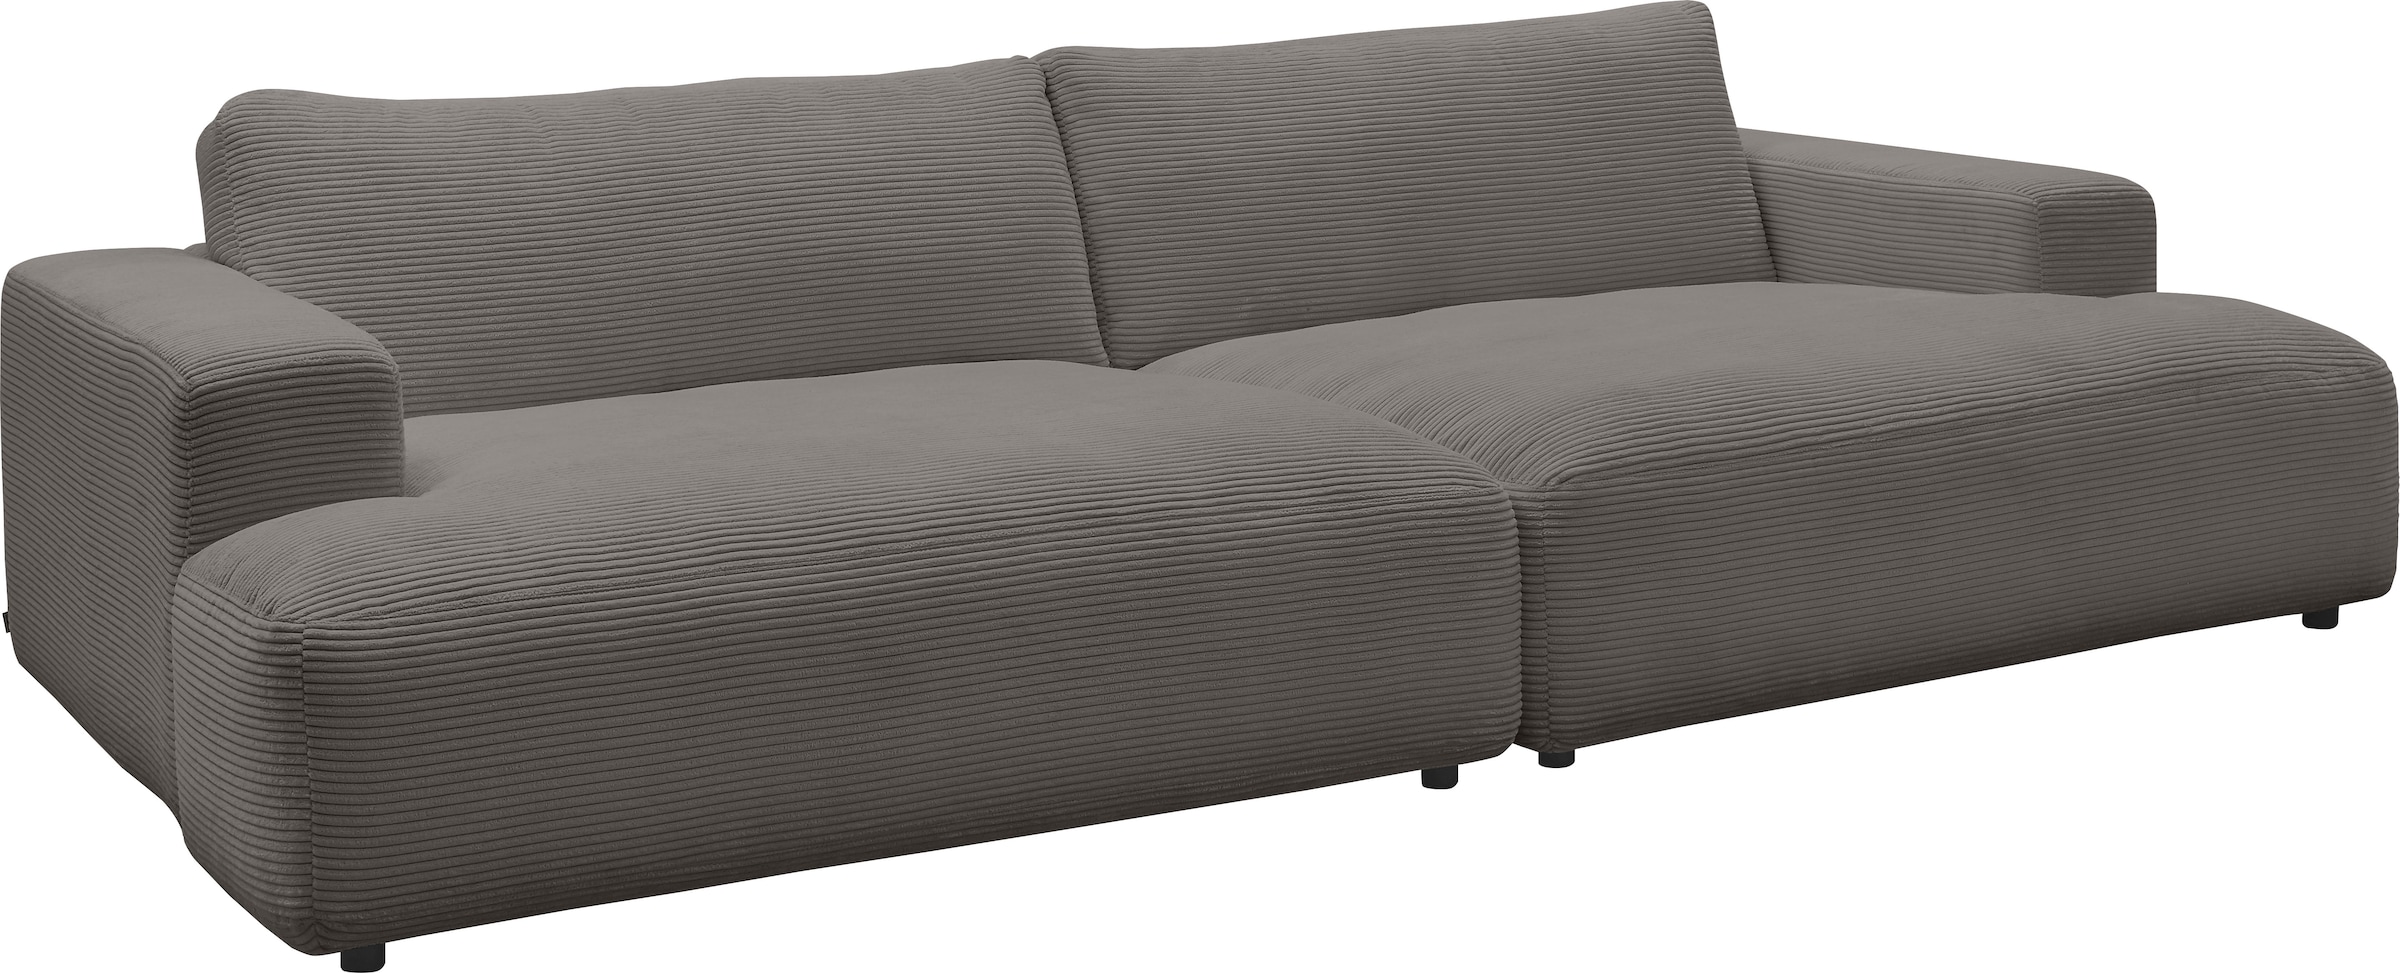 292 M Shop cm Loungesofa »Lucia«, Breite GALLERY branded by OTTO Online Musterring Cord-Bezug,